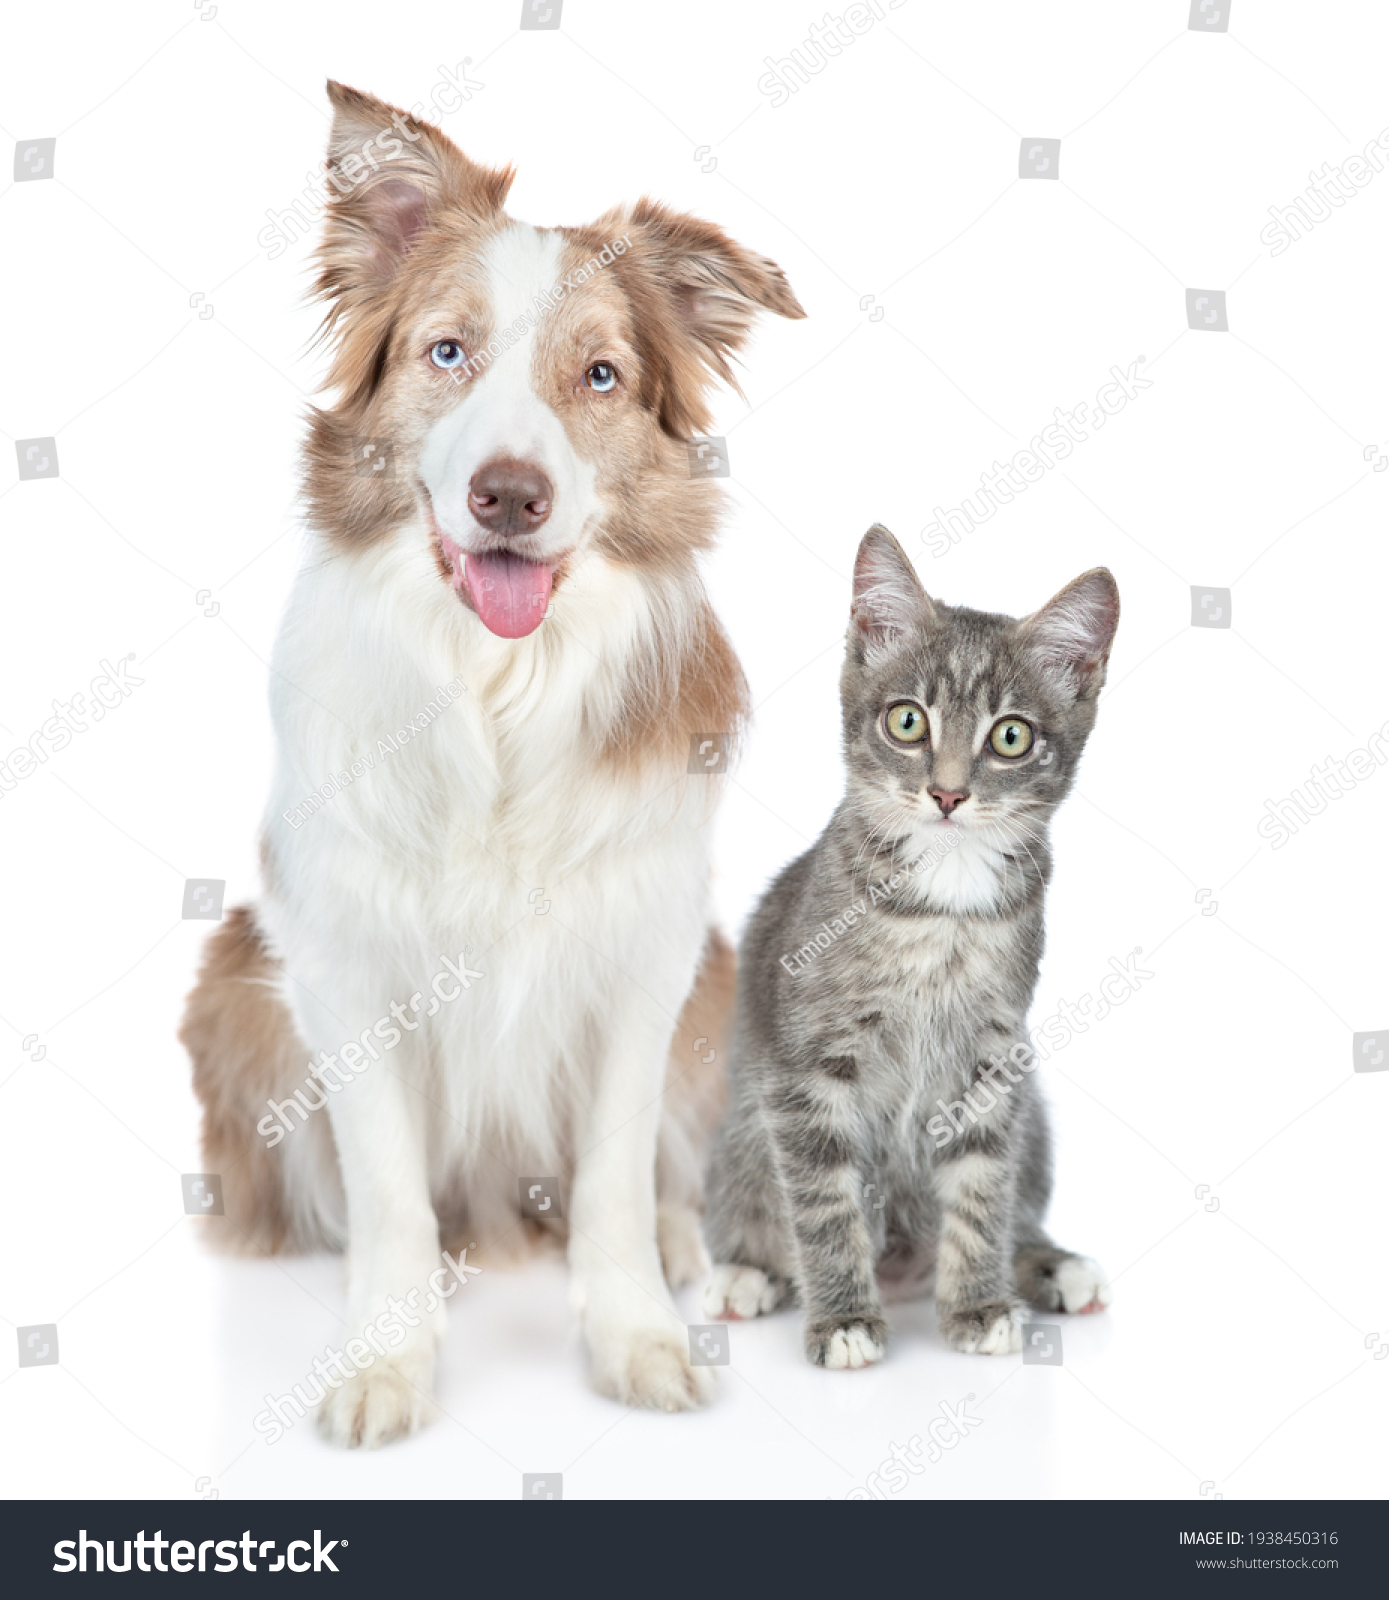 Border collie dog and kitten sit together and look at camera. isolated on white background #1938450316